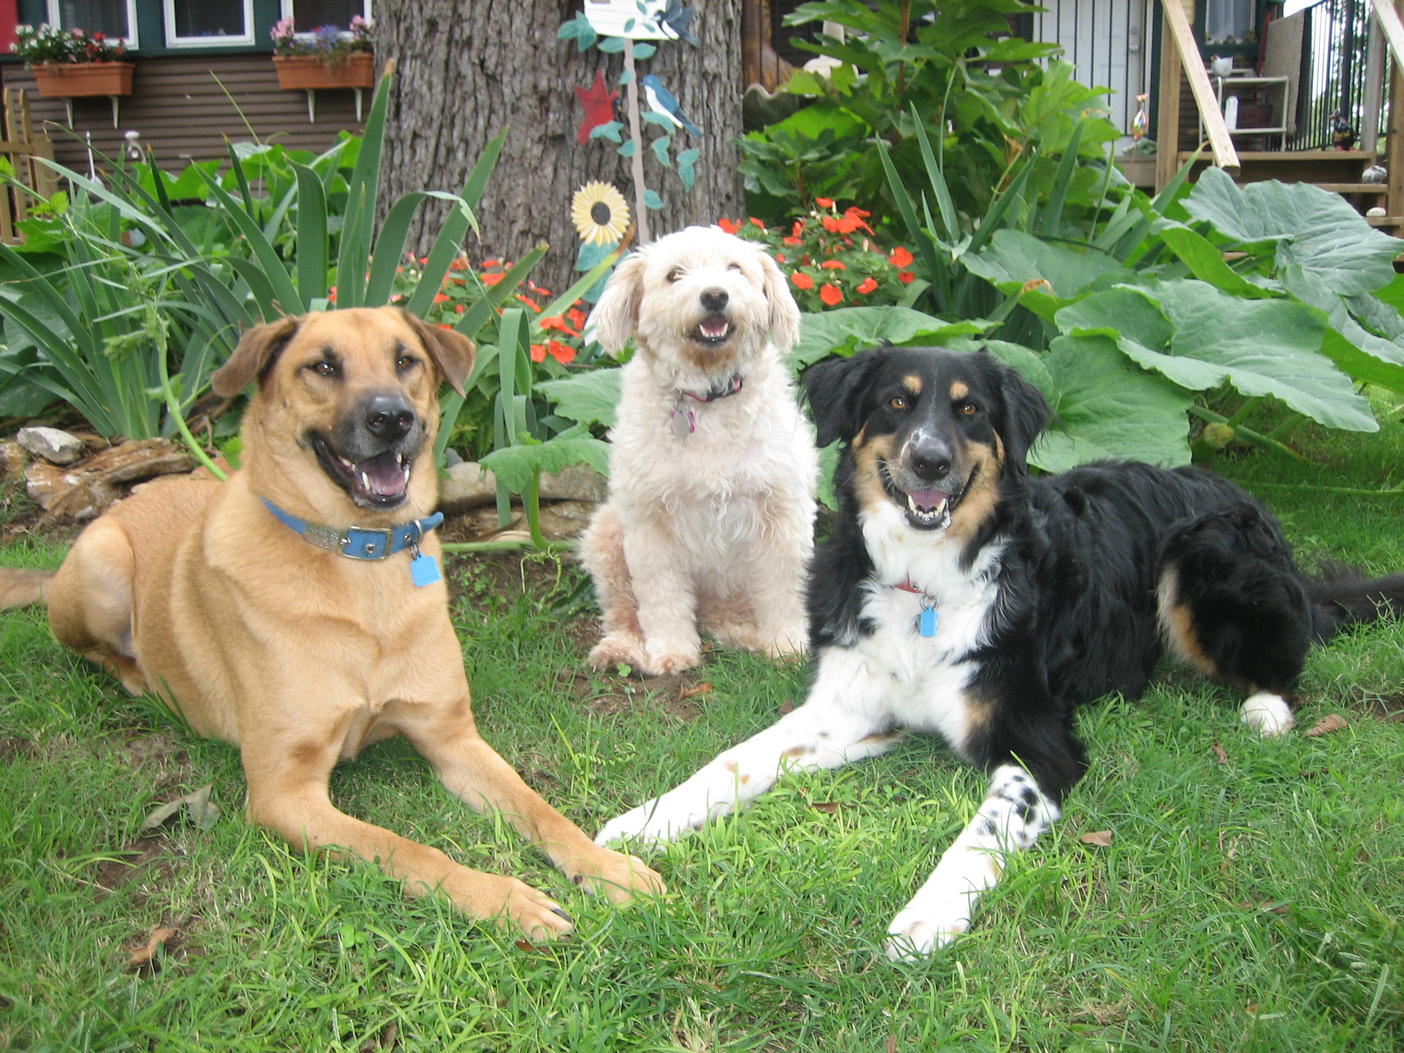 Three dogs with collar, within a dog fence area